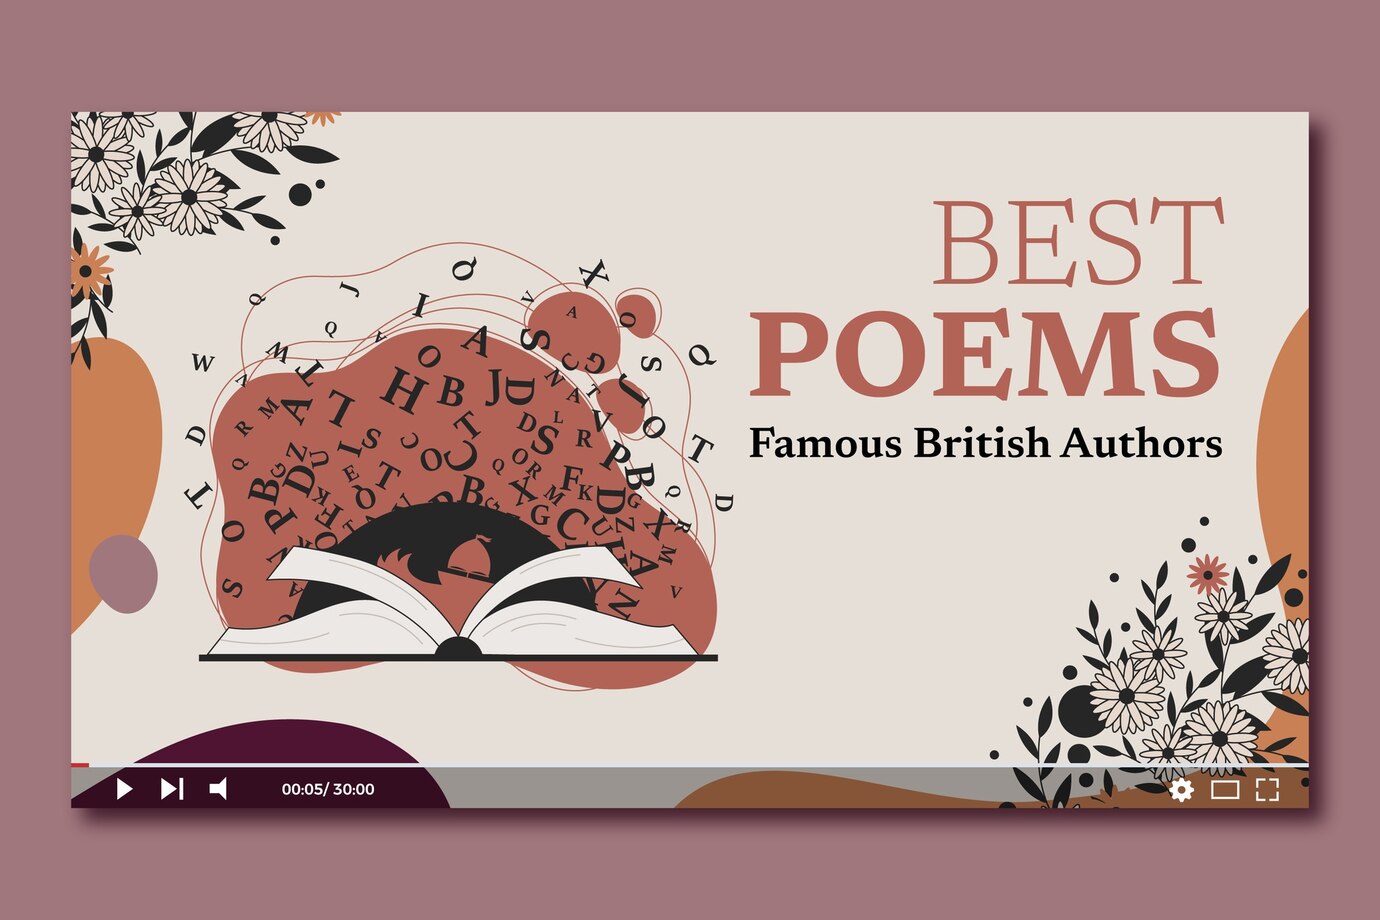 Best Poetic Books Every Literary Enthusiast Must Read